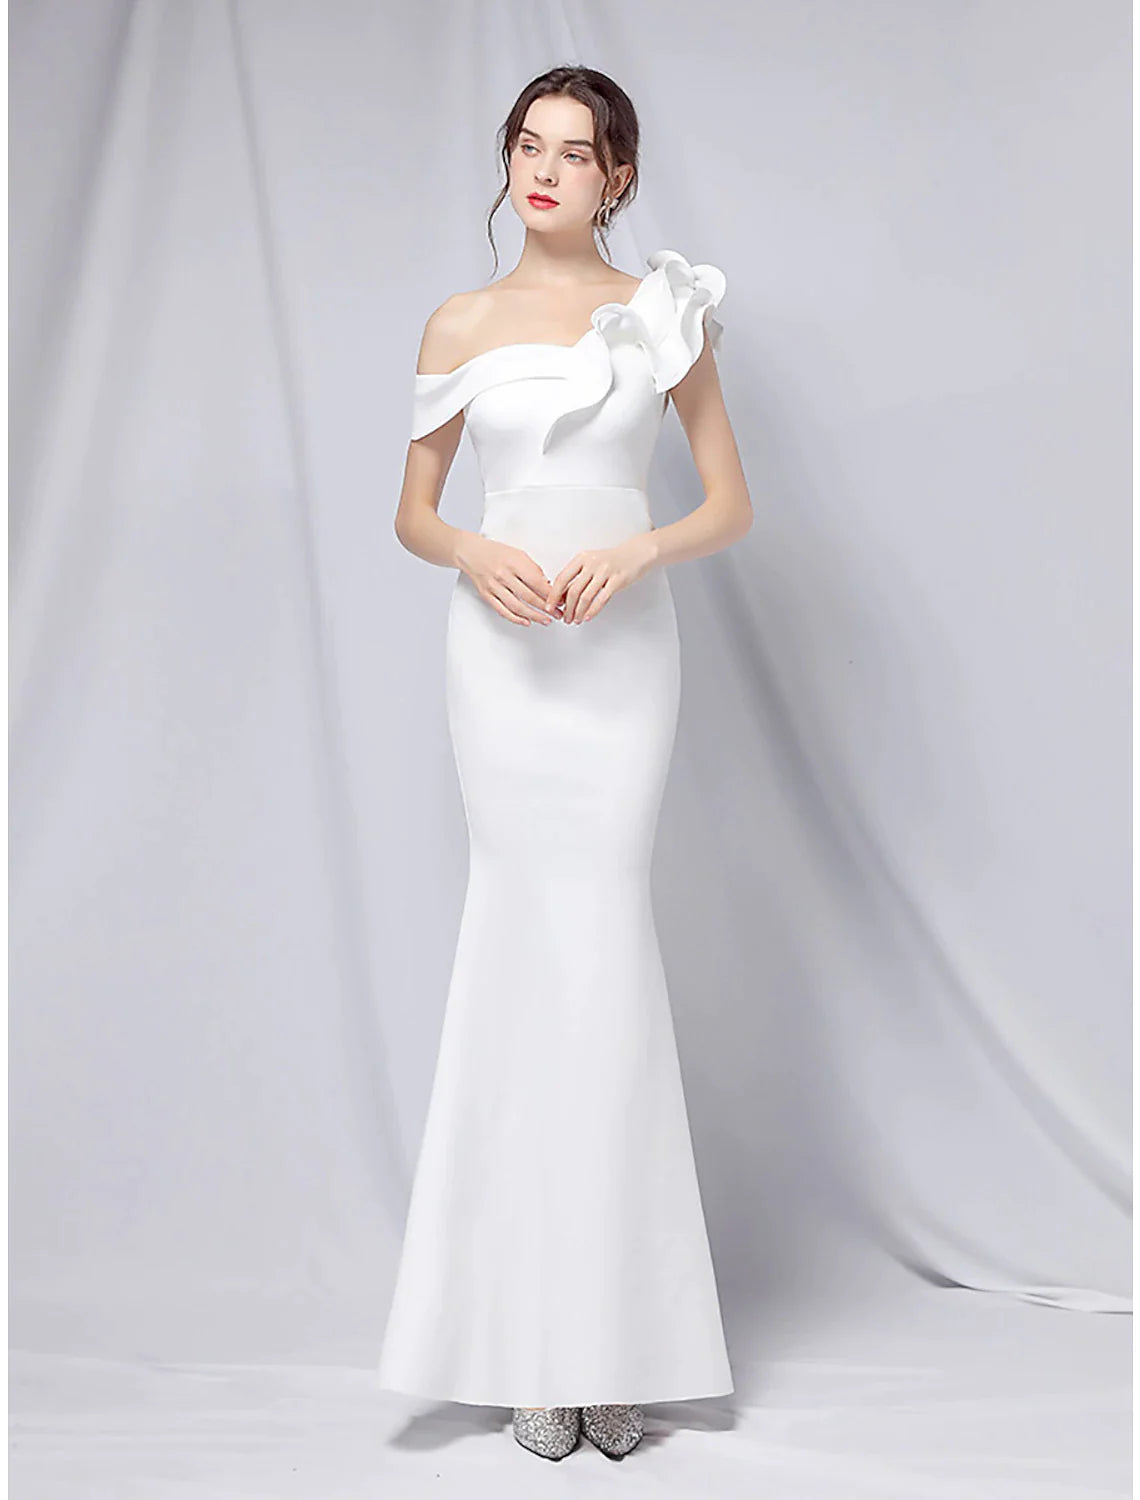 Mermaid / Trumpet Evening Gown Empire Dress Wedding Guest Floor Length Short Sleeve One Shoulder Stretch Satin with Ruffles